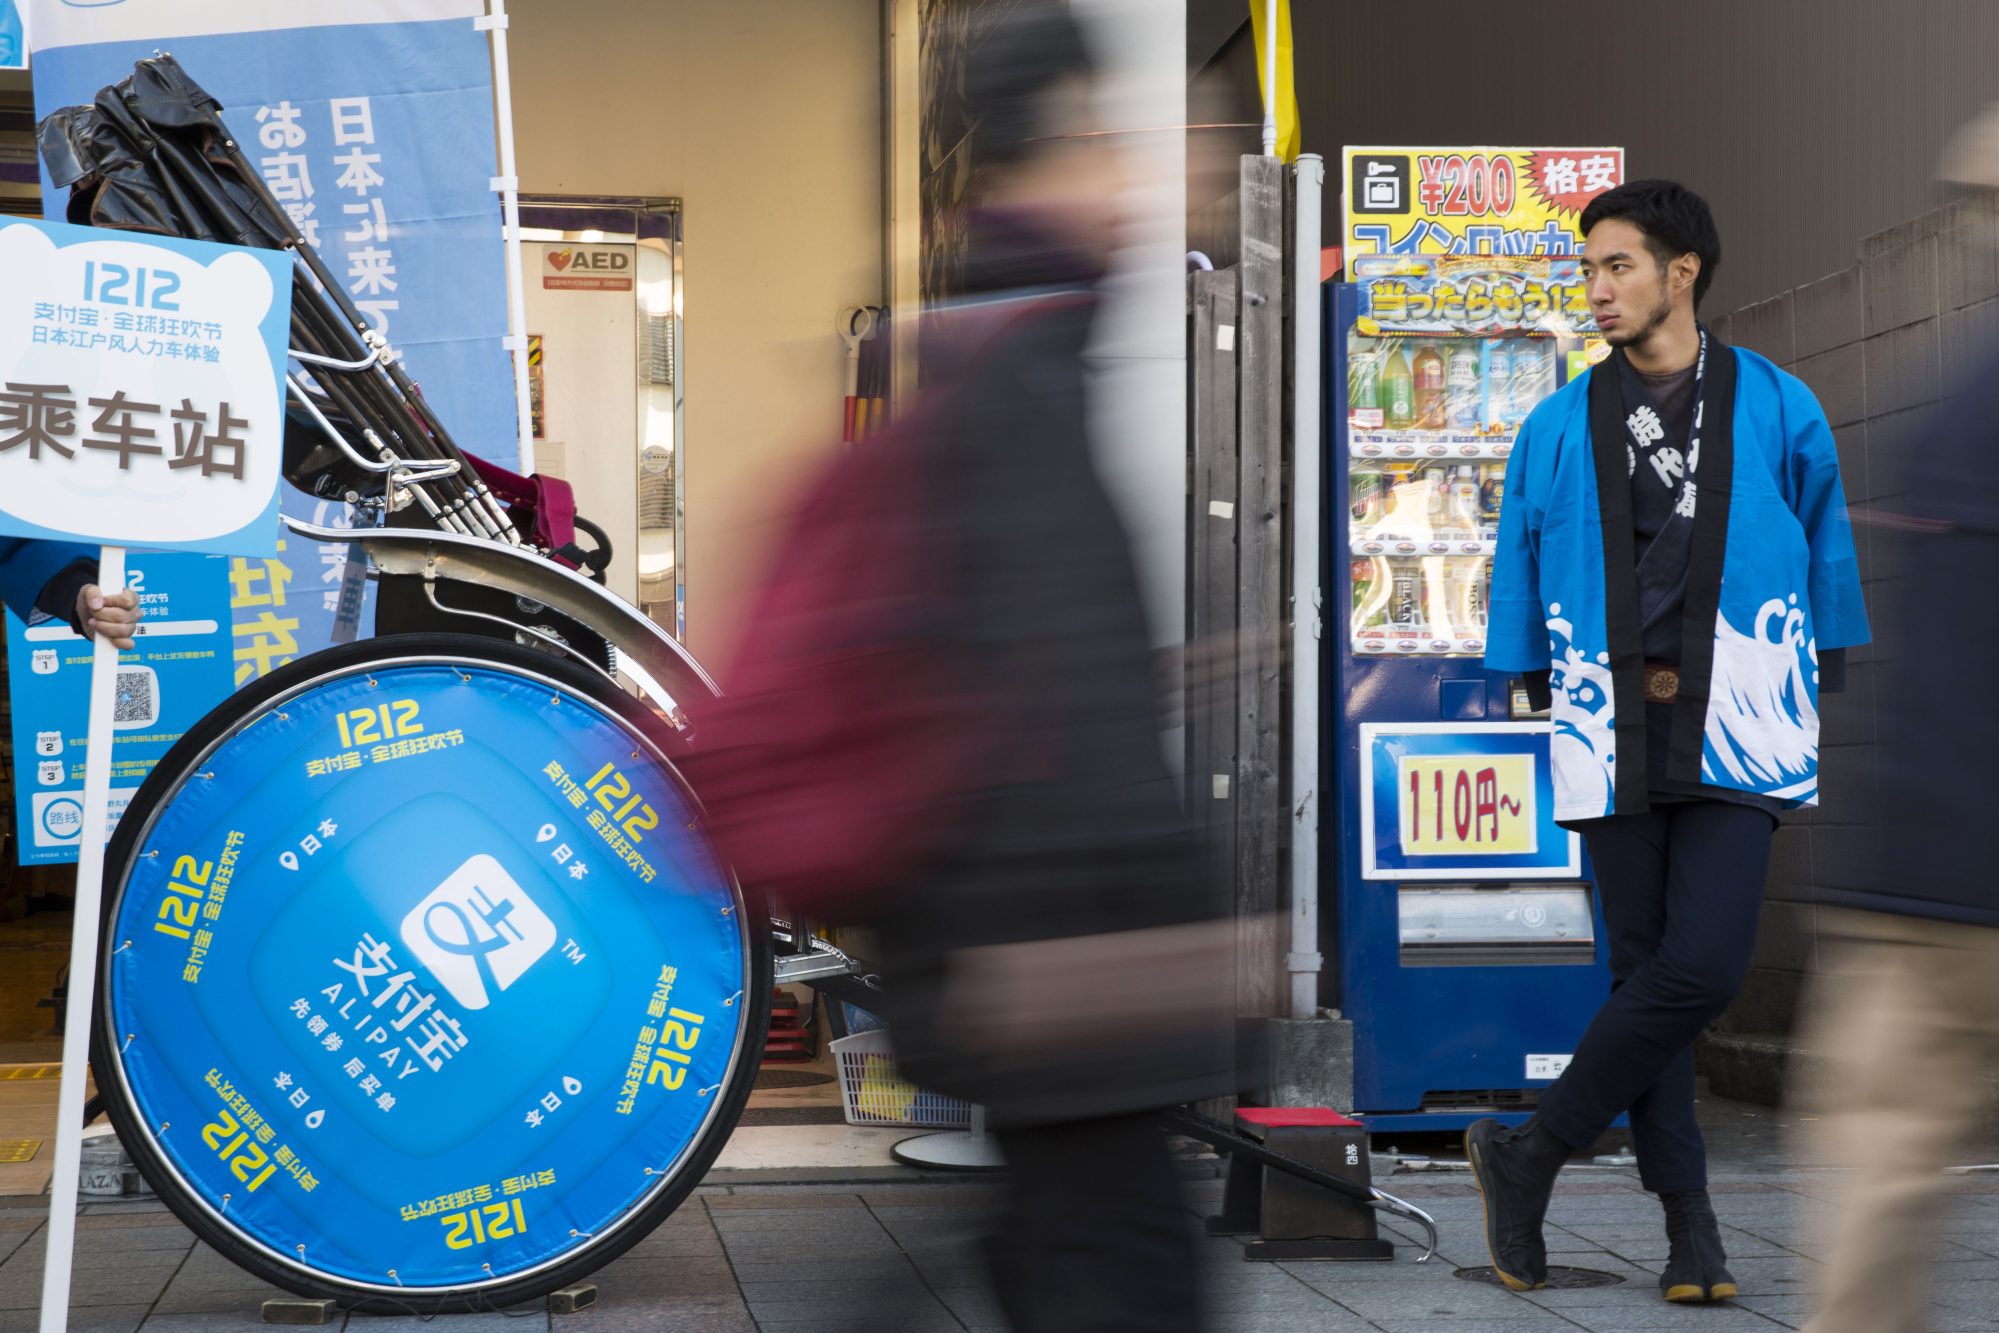 Alipay scouts Chinese tourists to crack open difficult but lucrative Japanese market